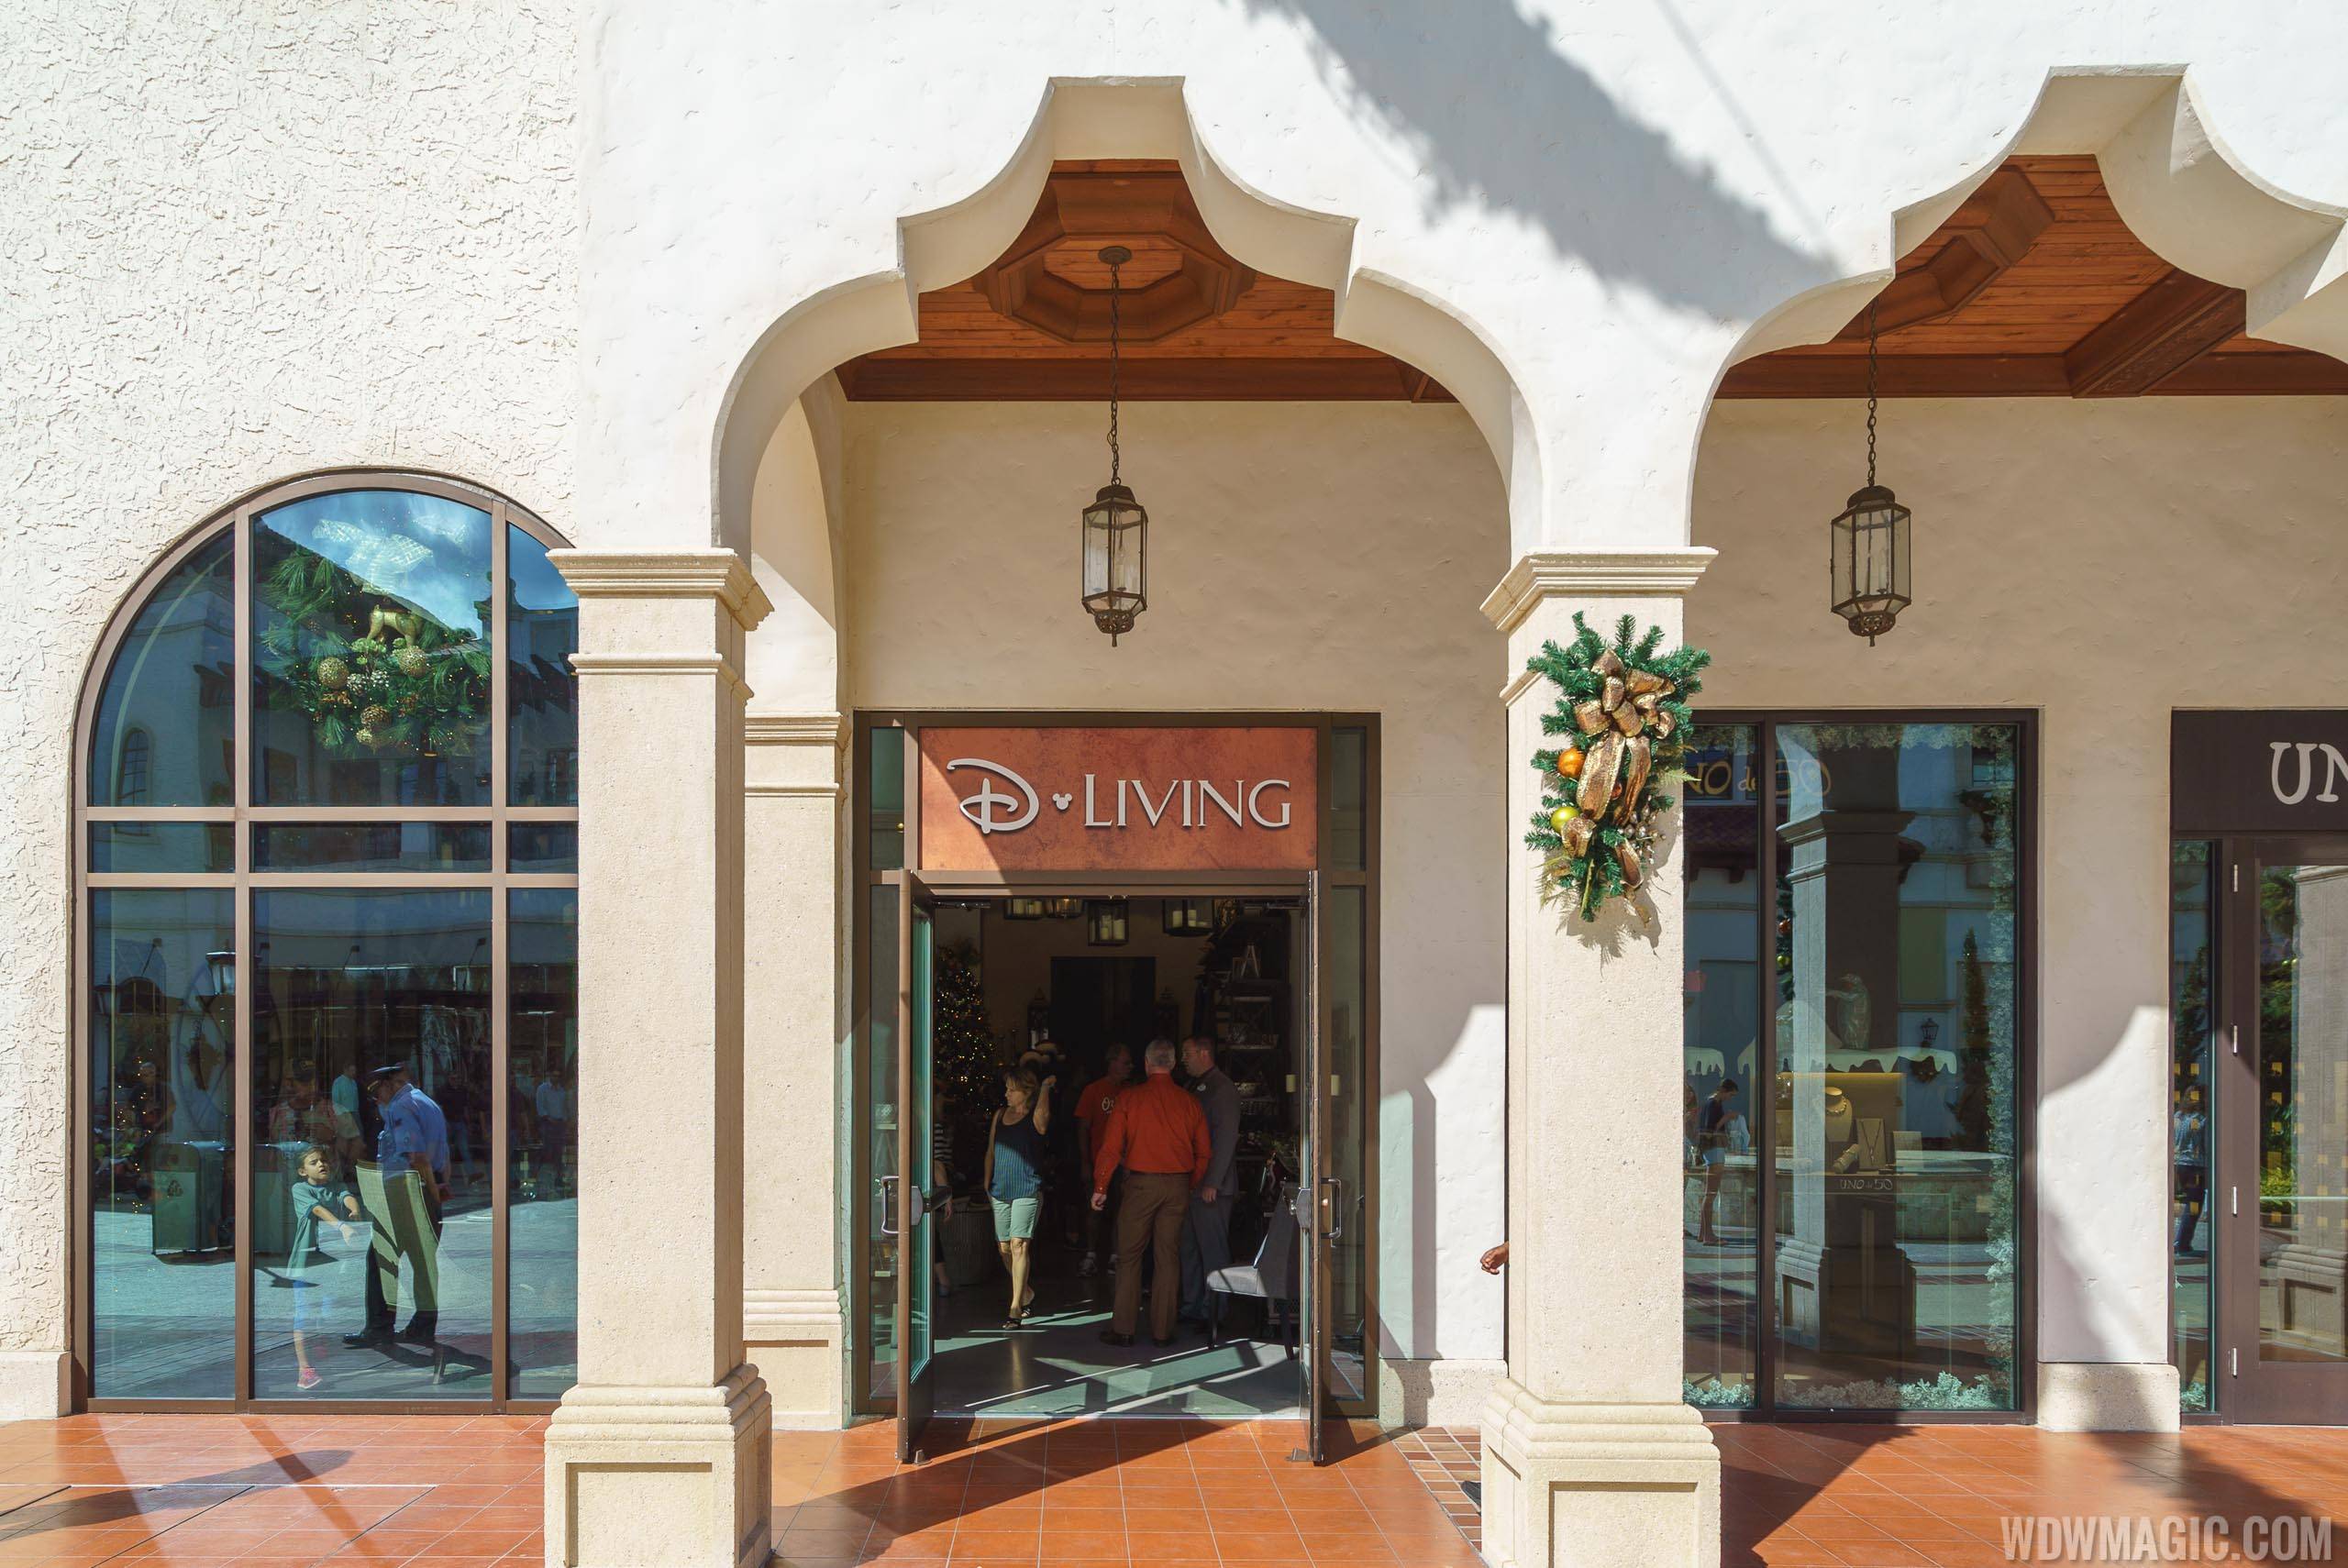 PHOTOS - D-Living opens in the Town Center at Disney Springs